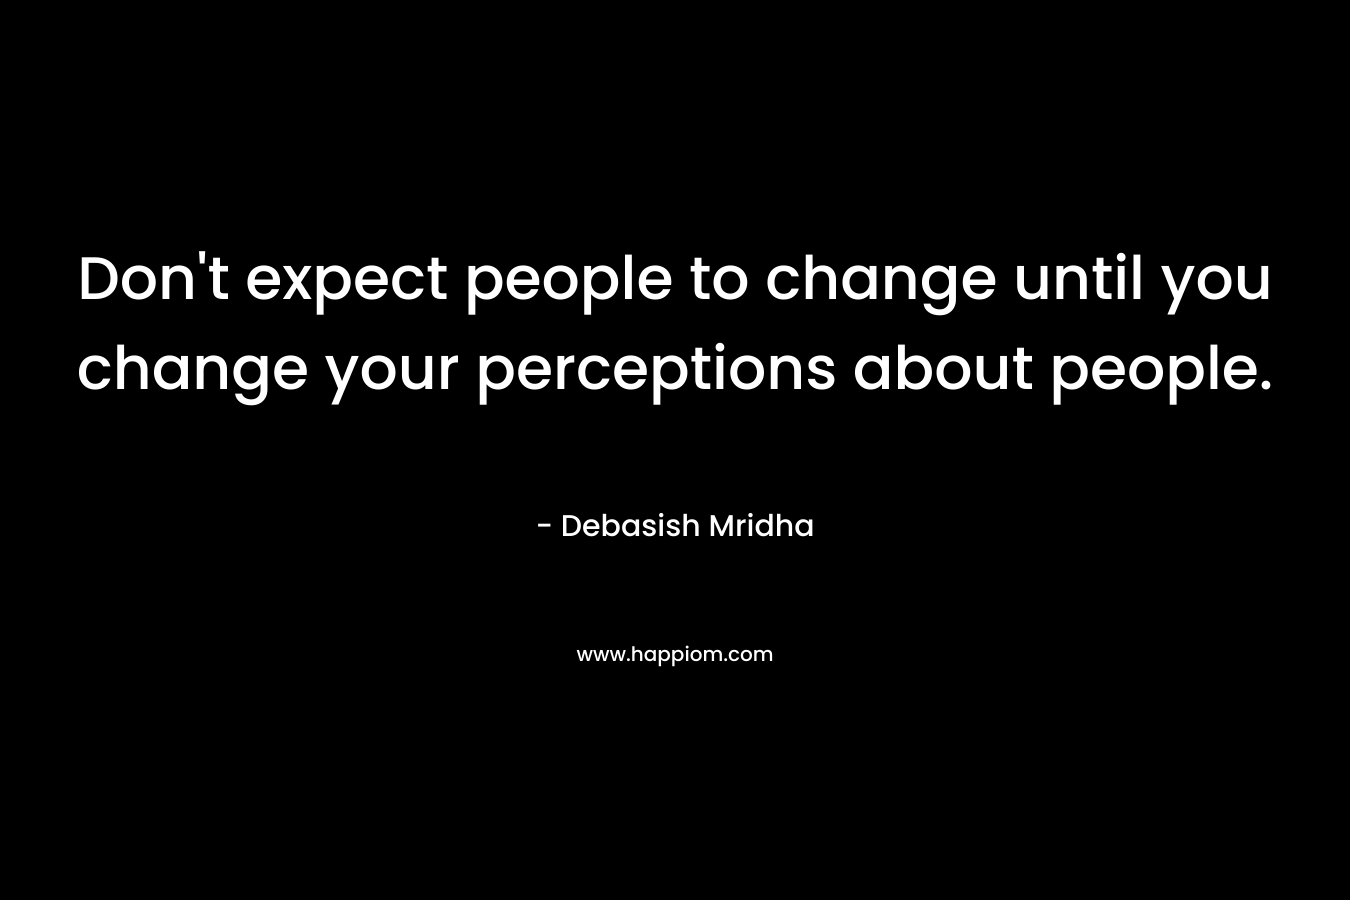 Don’t expect people to change until you change your perceptions about people. – Debasish Mridha